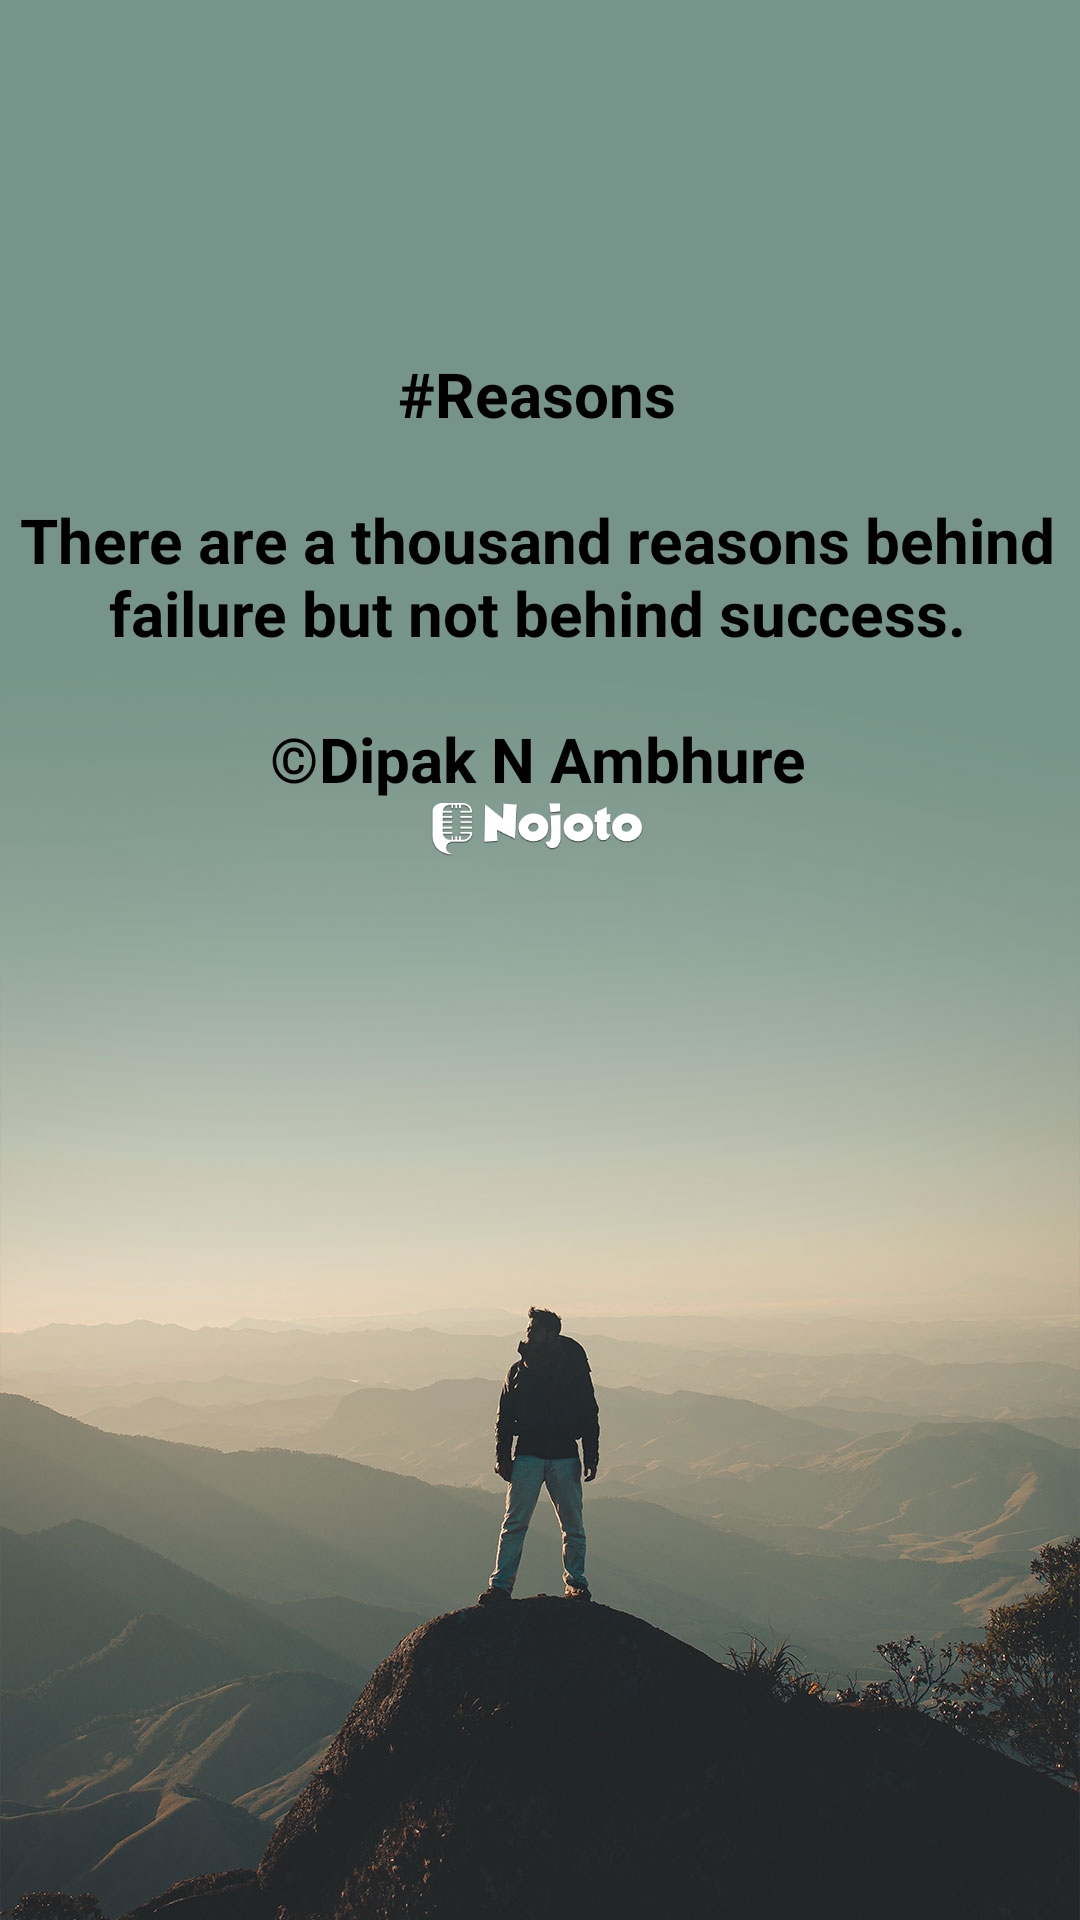 #Quote #Opinion #thought_of_the_day #quotesdaily #true #Success #Failure #Life #motivate
#Travelstories